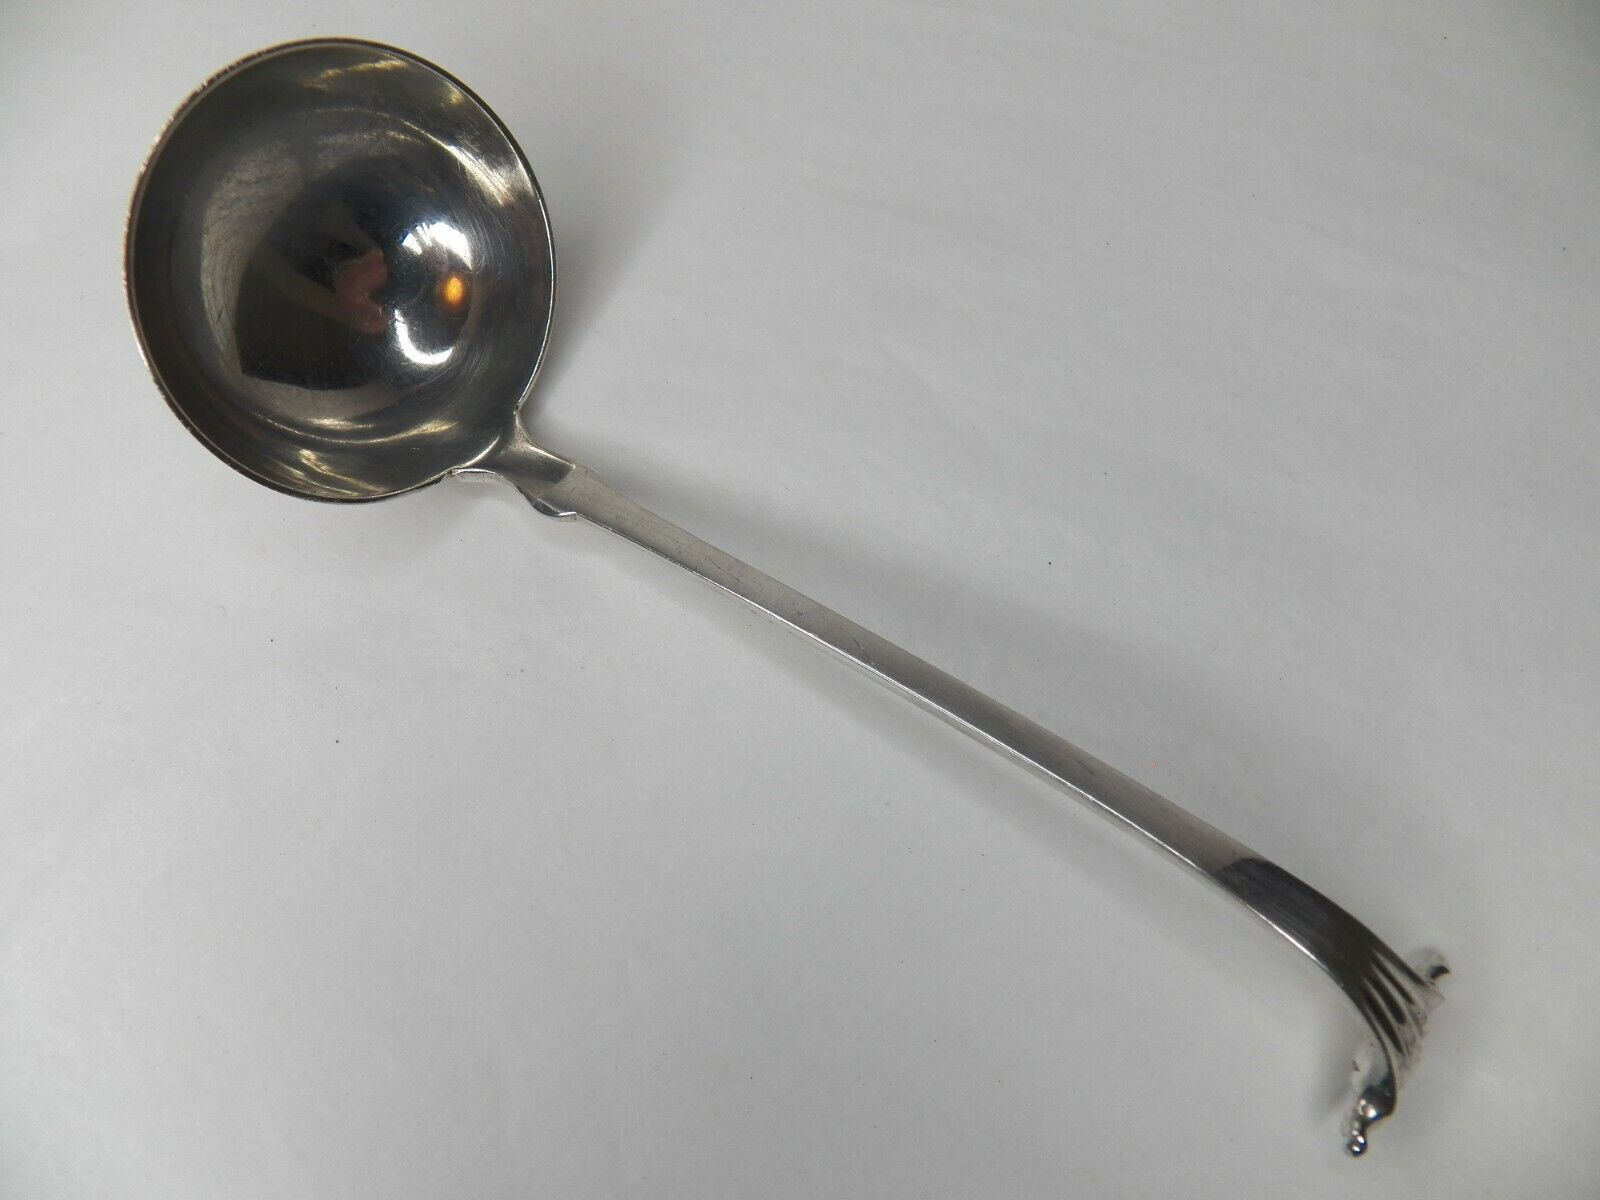 CURRIER & ROBY ONSLOW STERLING SILVER SAUCE LADLE 5 3/4" NO MONOGRAMS